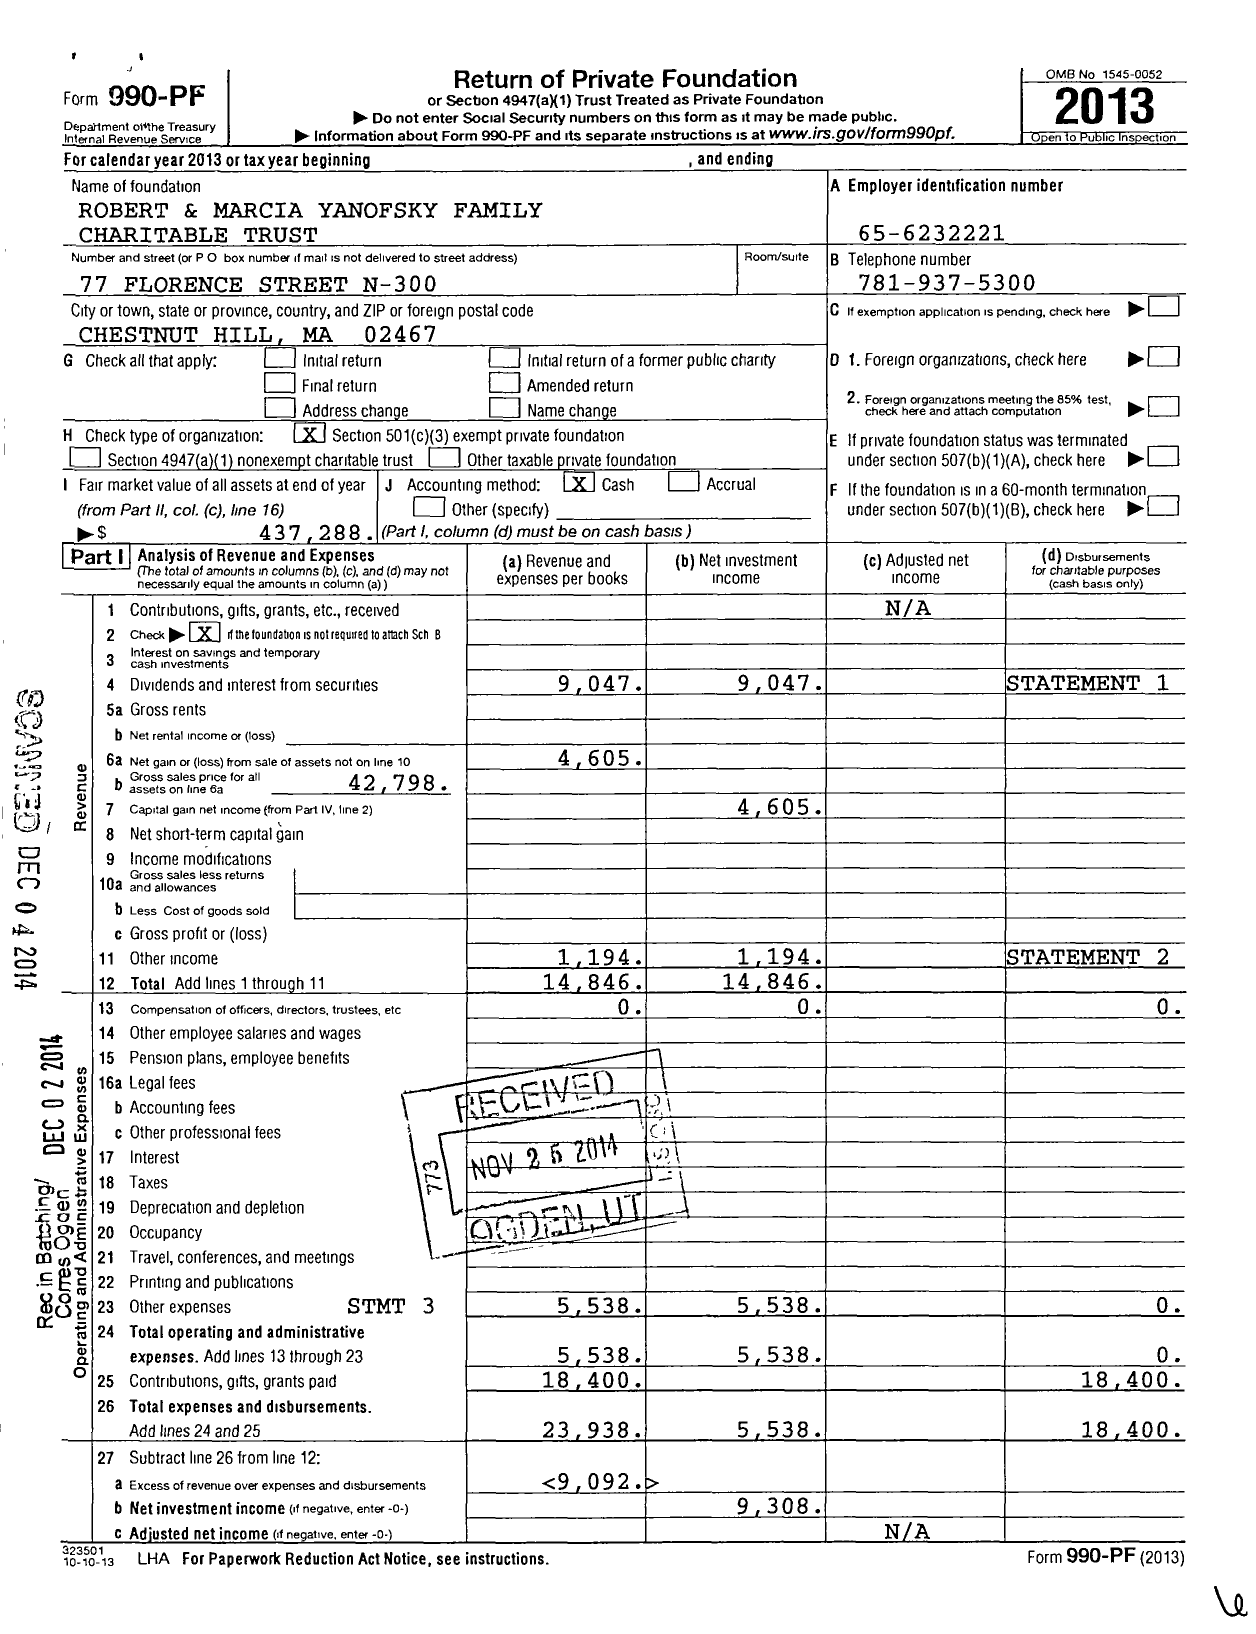 Image of first page of 2013 Form 990PF for Robert and Marcia Yanofsky Family Charitable Trust